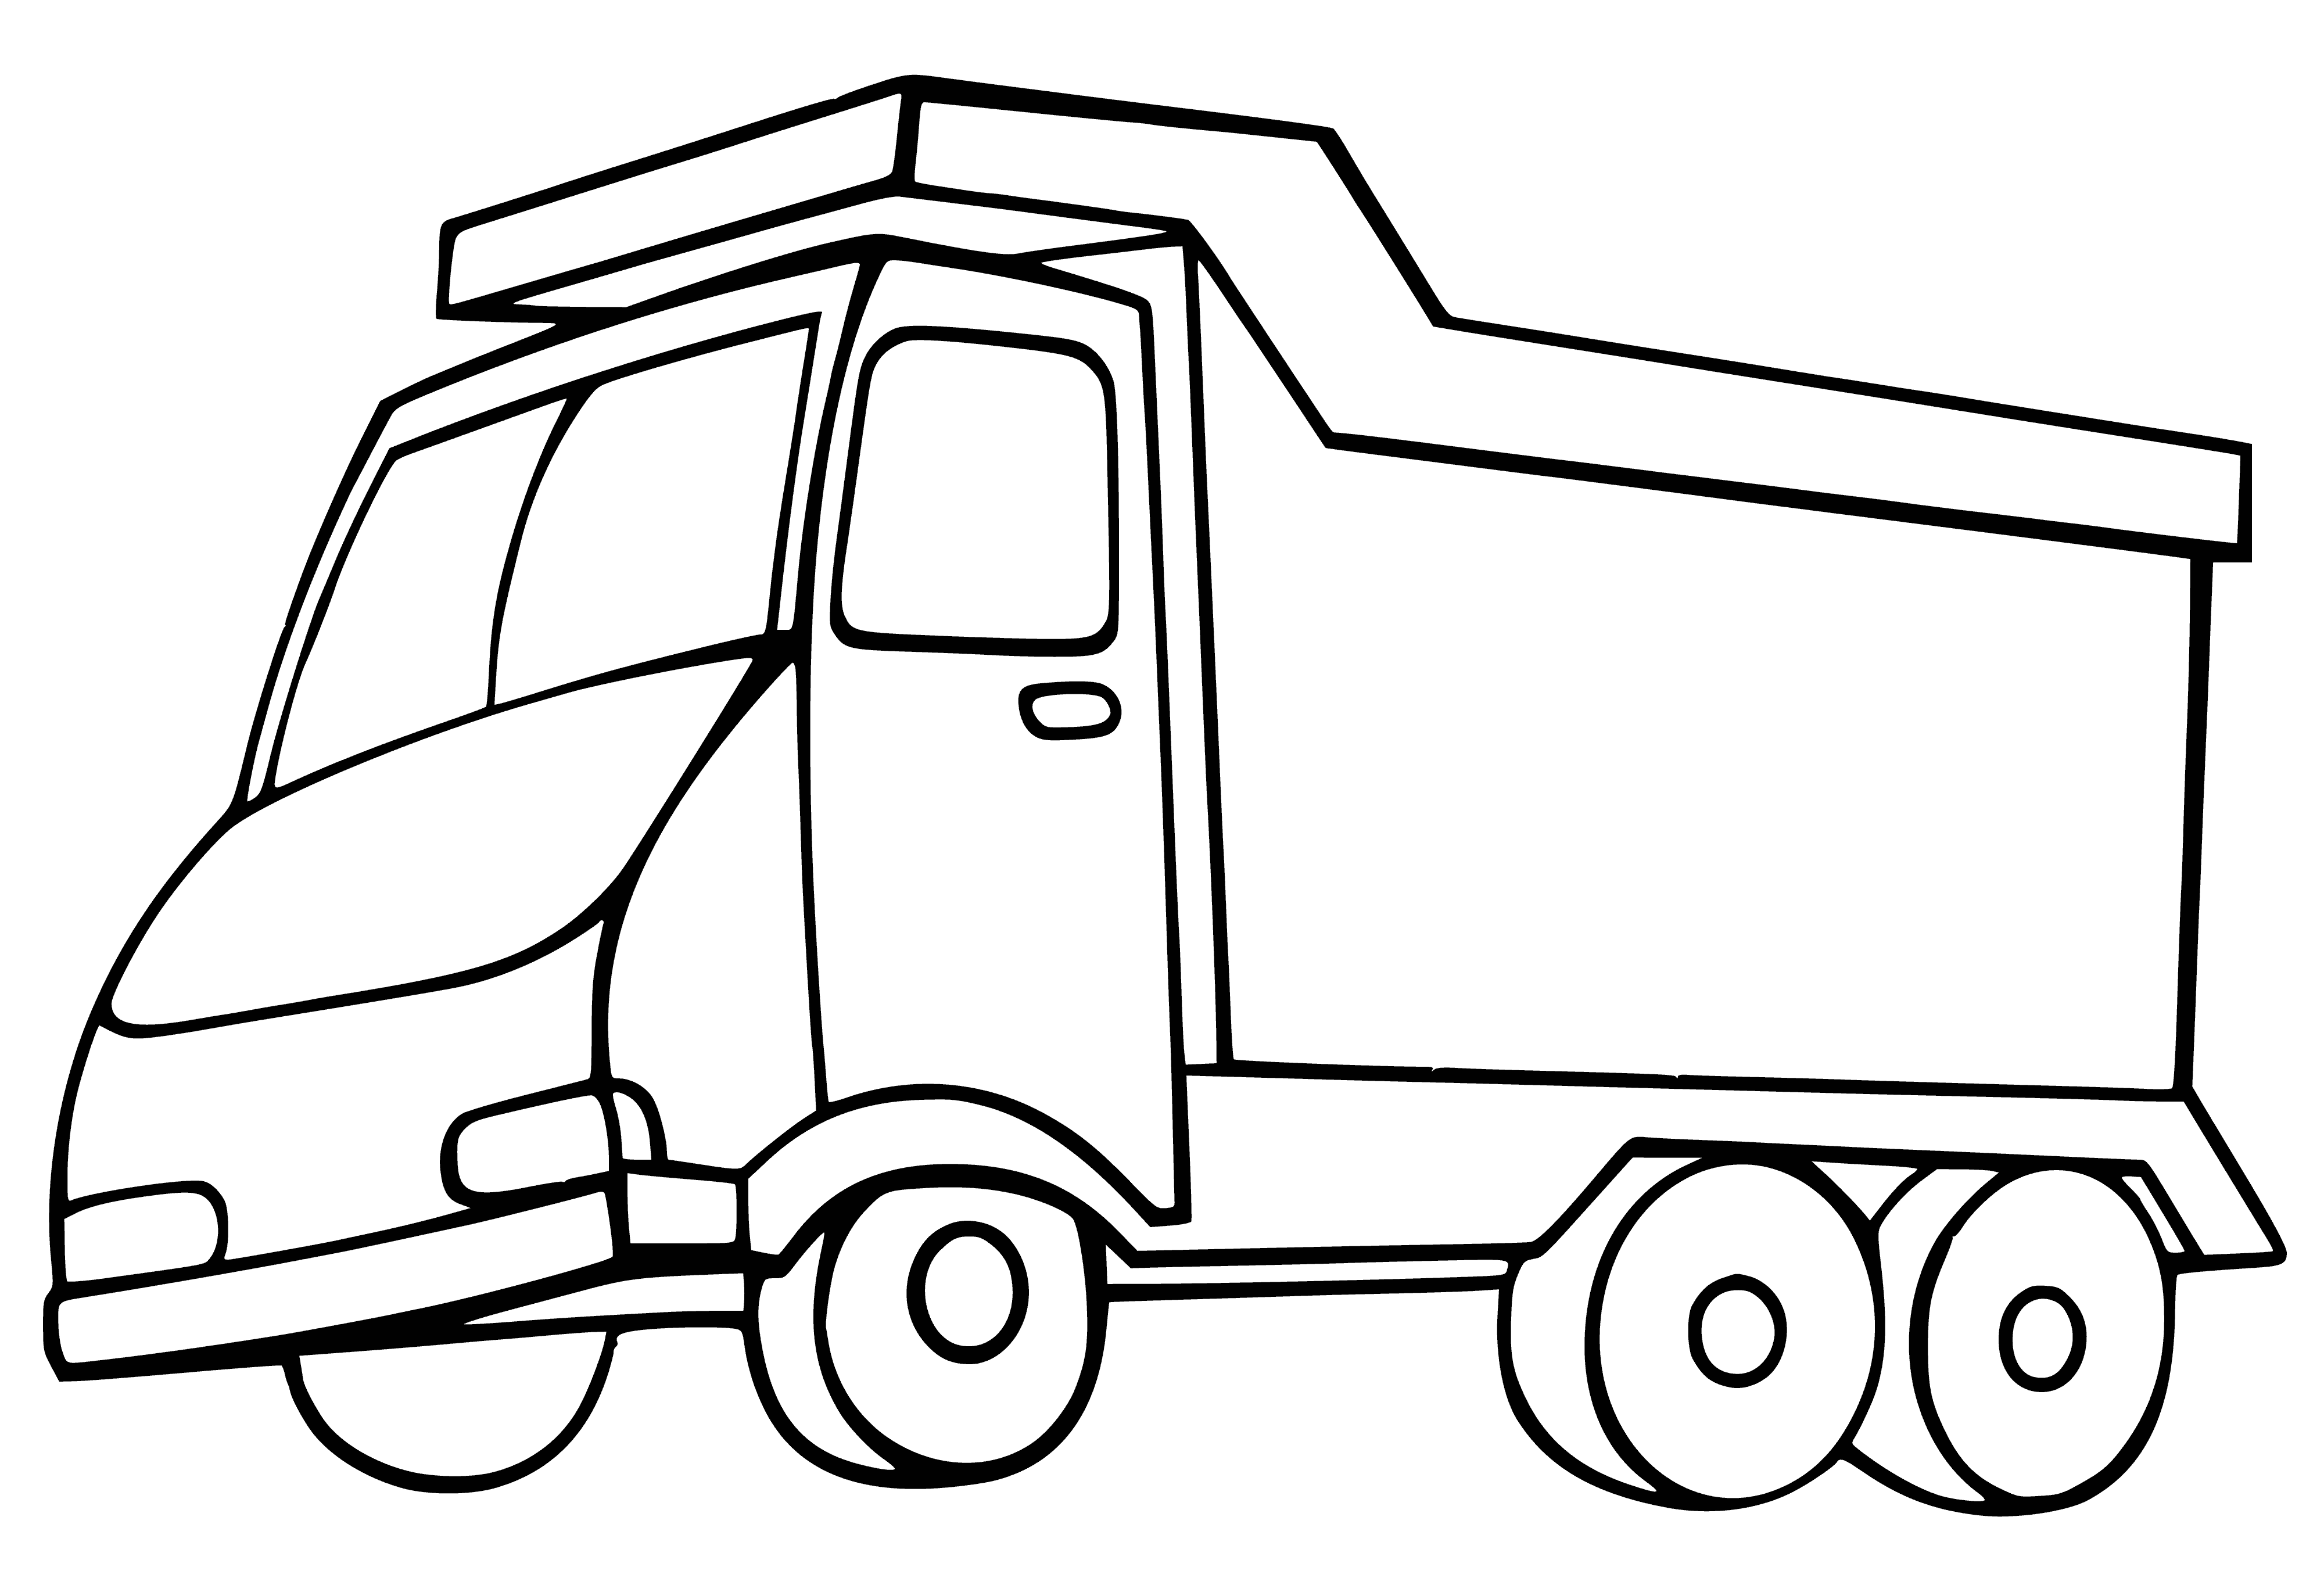 coloring page: A blue truck featuring a yellow bed & orange wheels that can tilt up & down. #Trucks